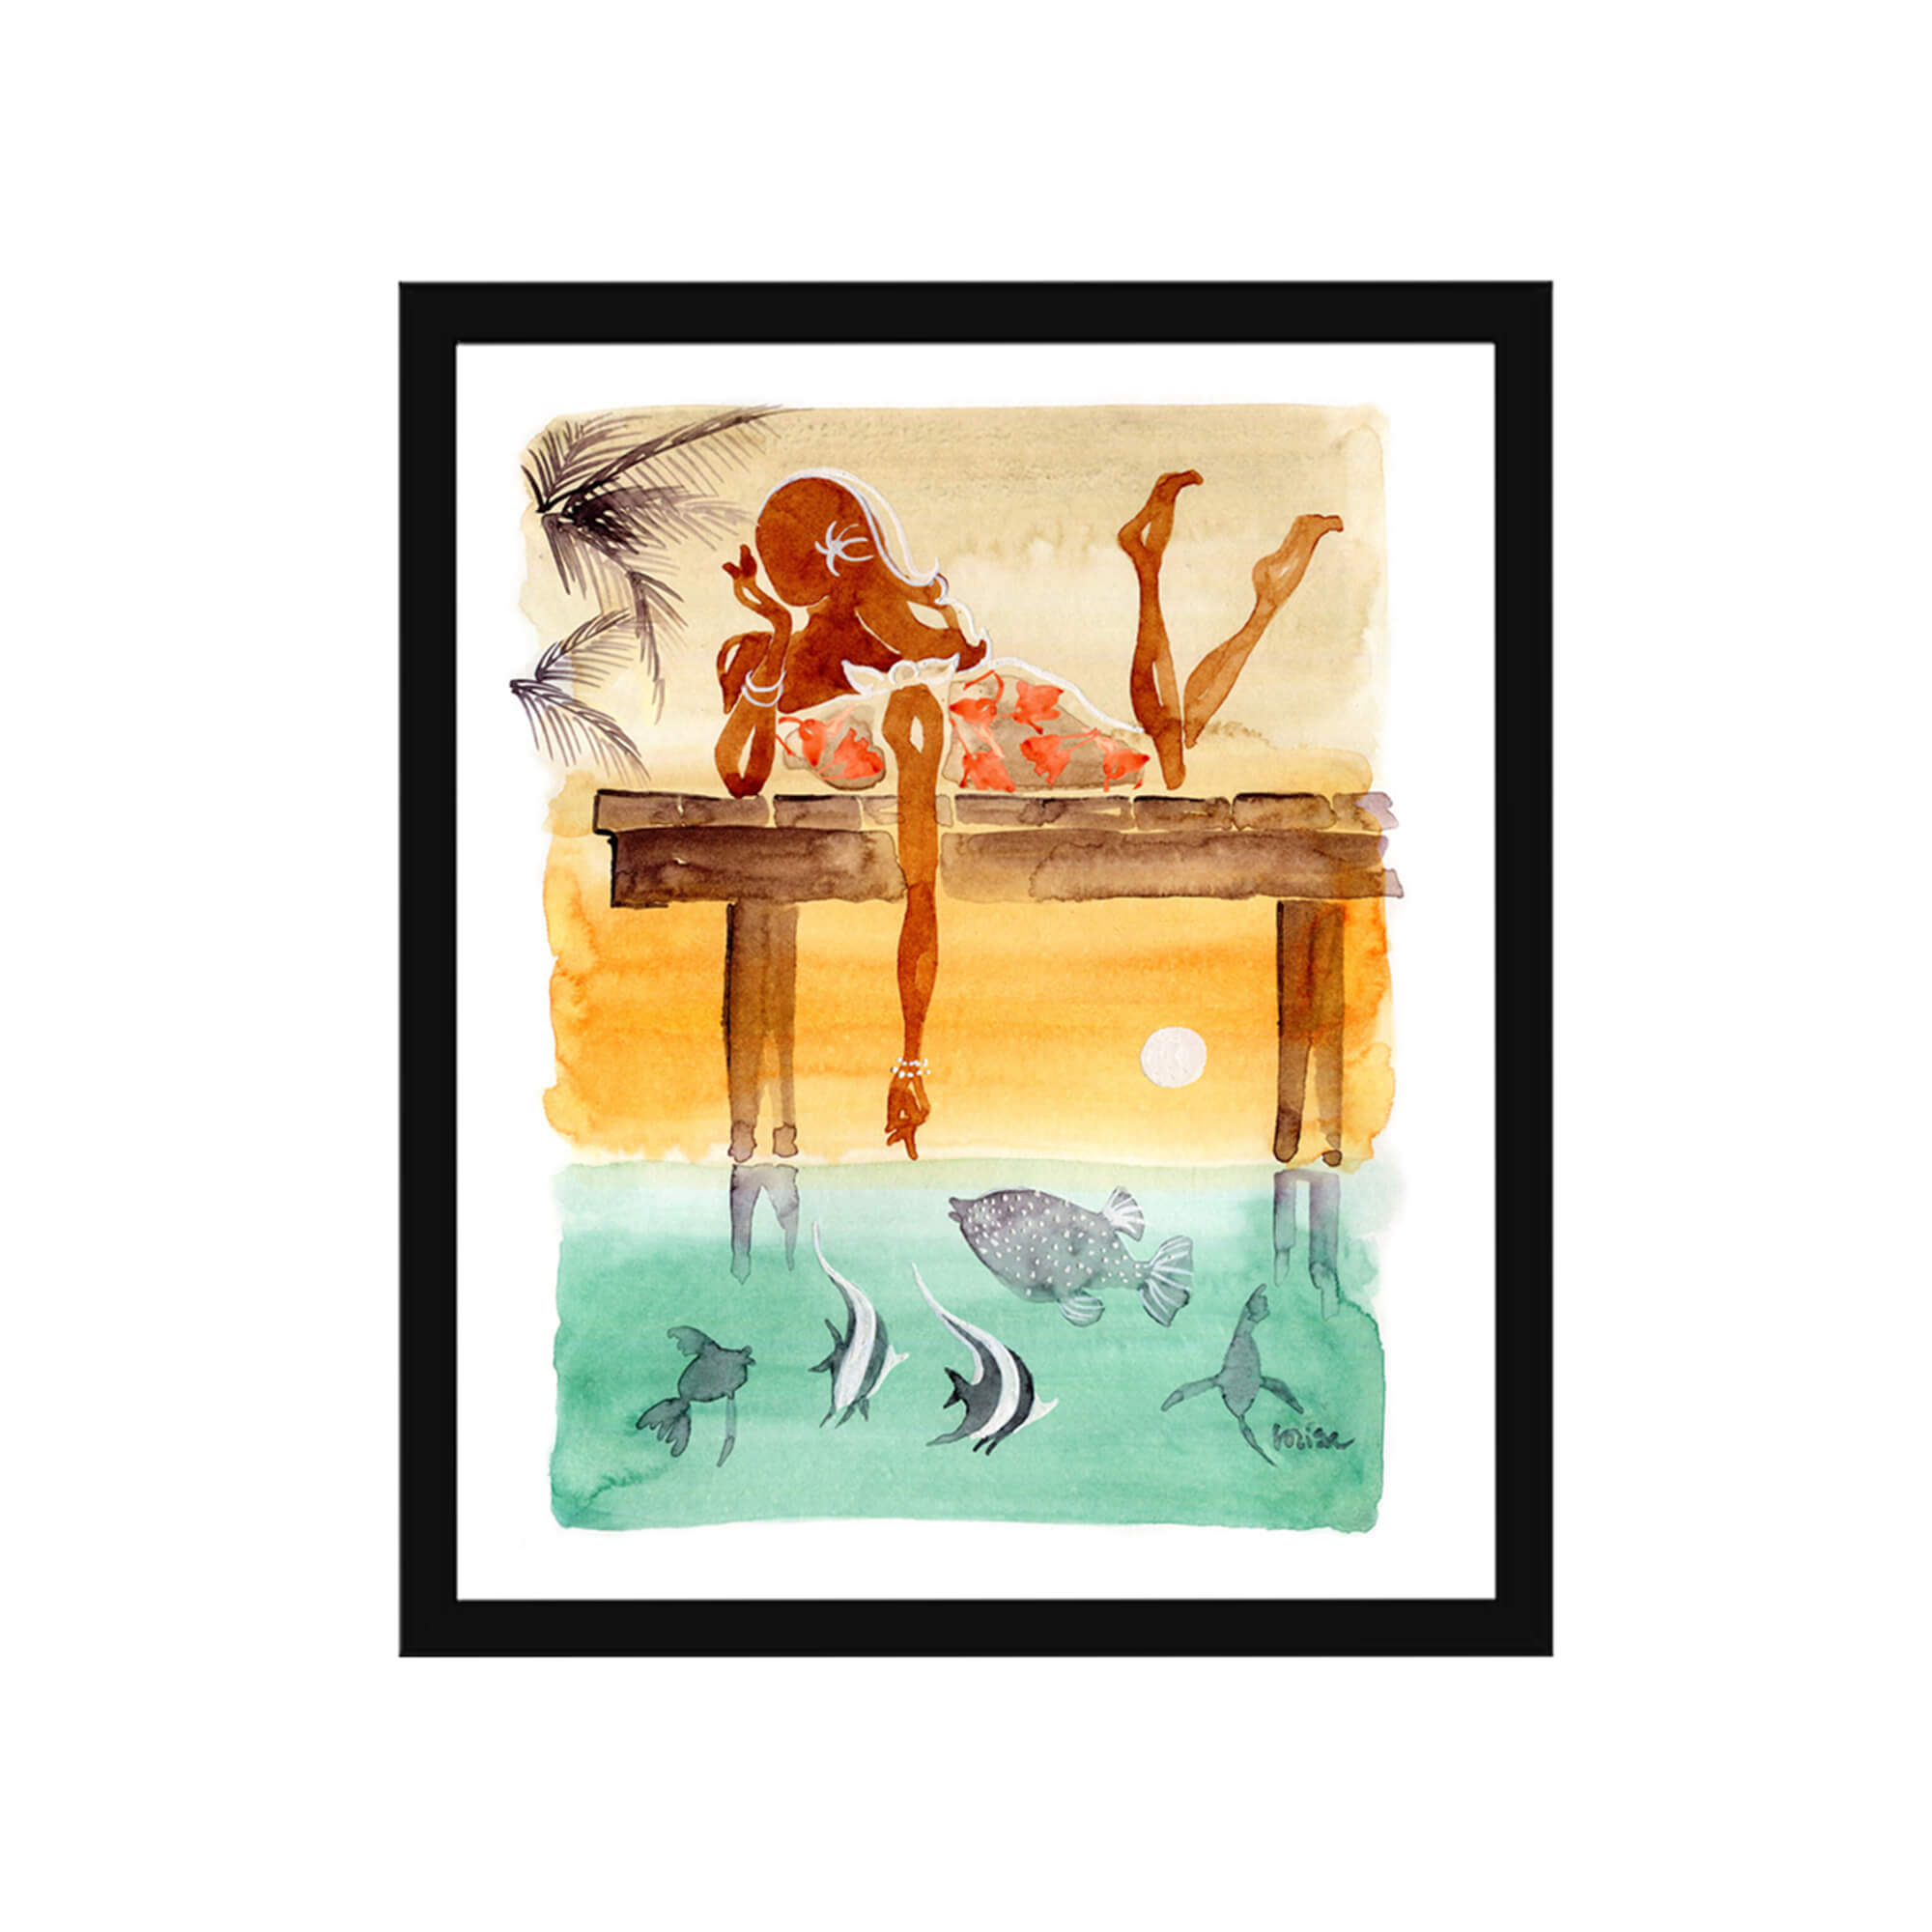 Framed paper giclée print of a watercolor artwork featuring a woman enjoying the colorful sunset by Hawaii artist Lovisa Oliv